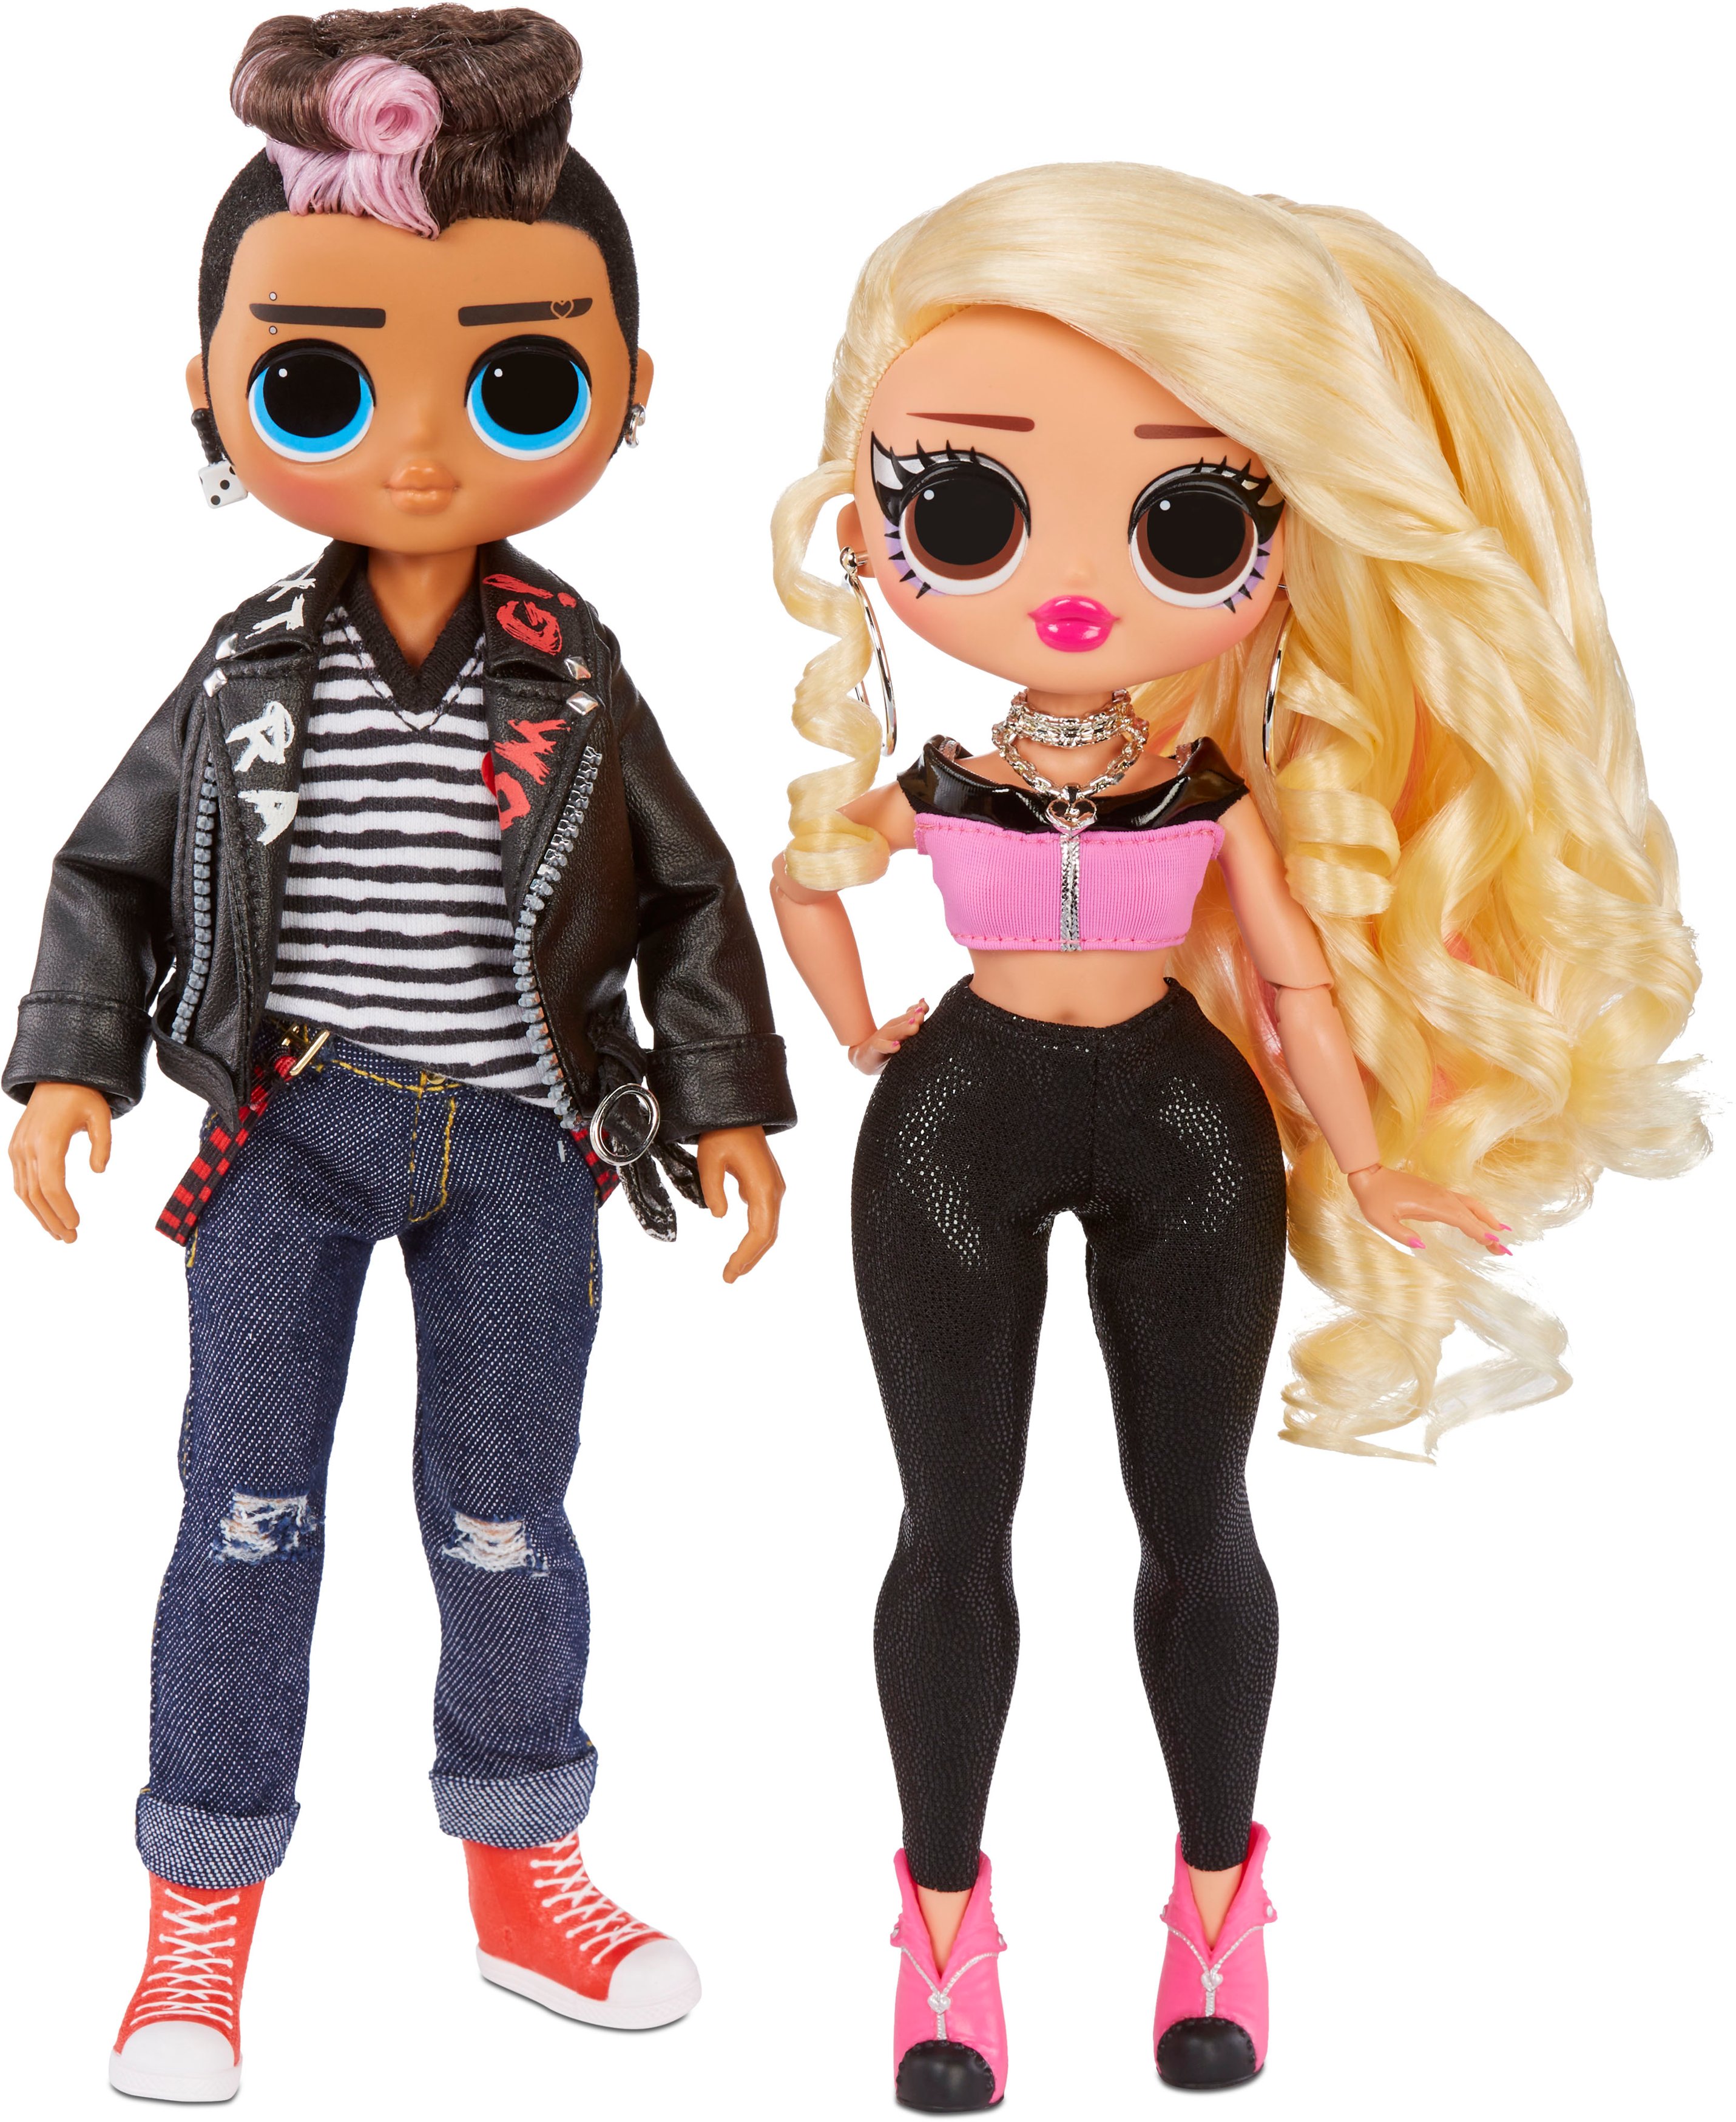 Angle View: L.O.L Surprise! OMG Movie Magic Fashion Tough Dude and Pink Chick Doll Playset, 25 Pieecs